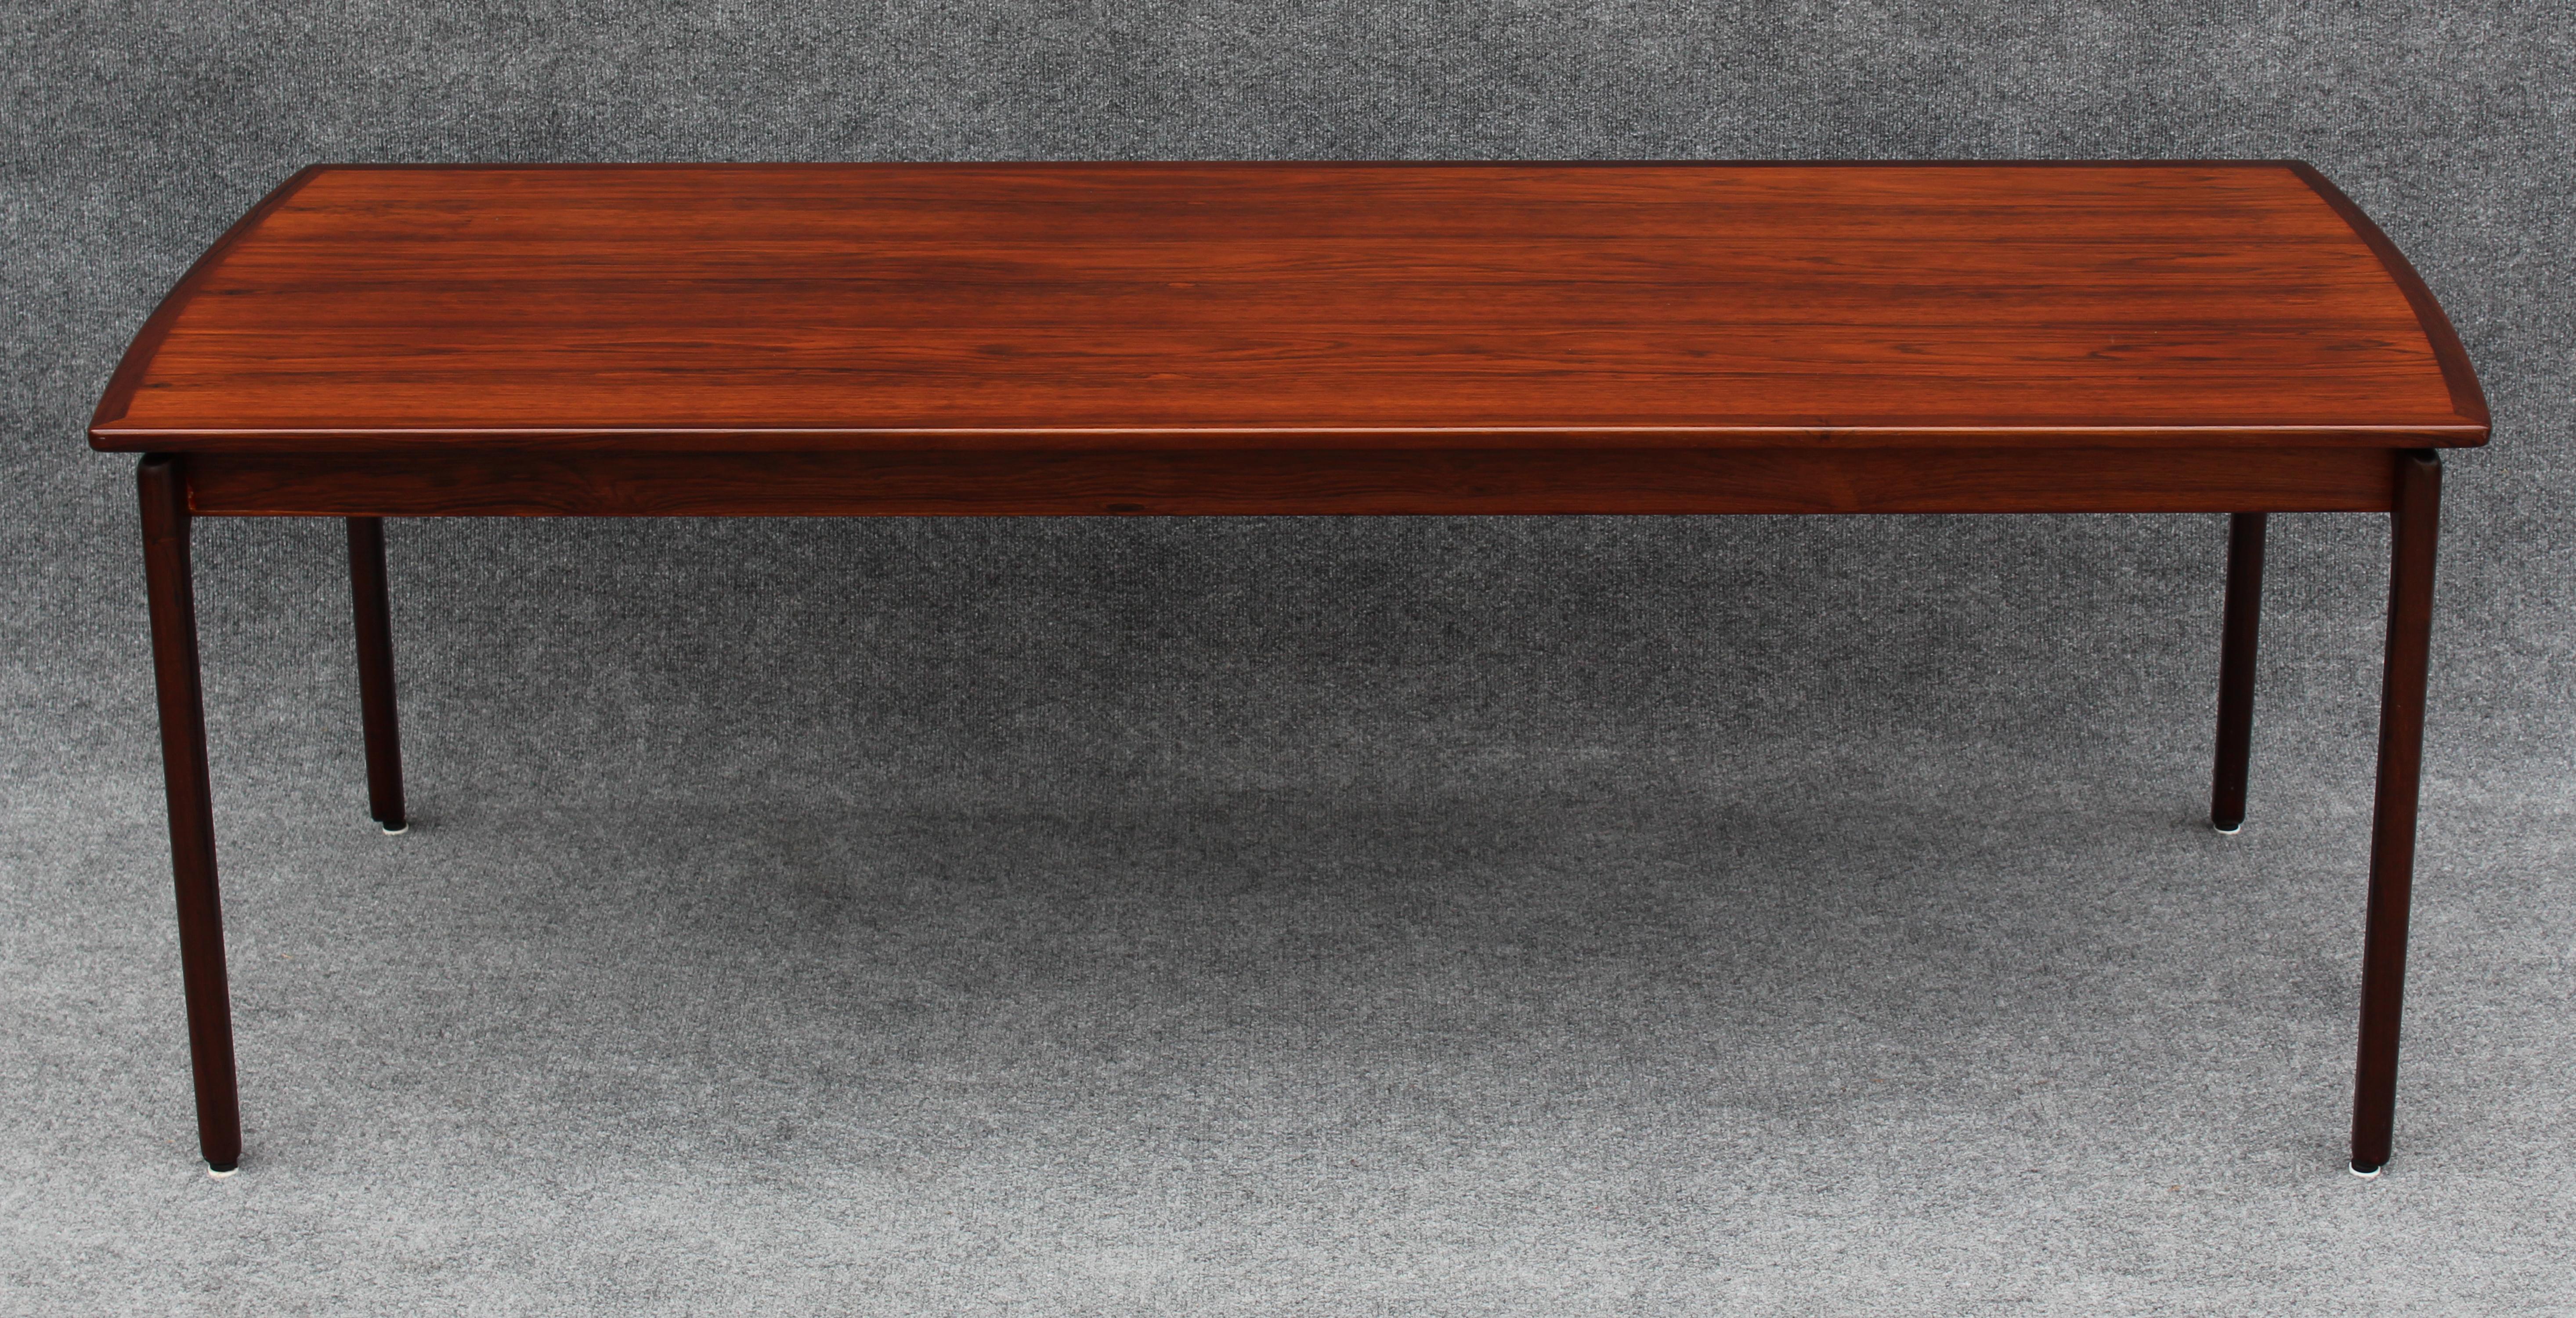 Designed in the 1960s by iconic designer Ole Wanscher, this high coffee table was produced by Poul Jeppesens Mobelfabrik. This example is not only the rare rosewood variant, but also one of the few ever imported into the US. Designed in such a way